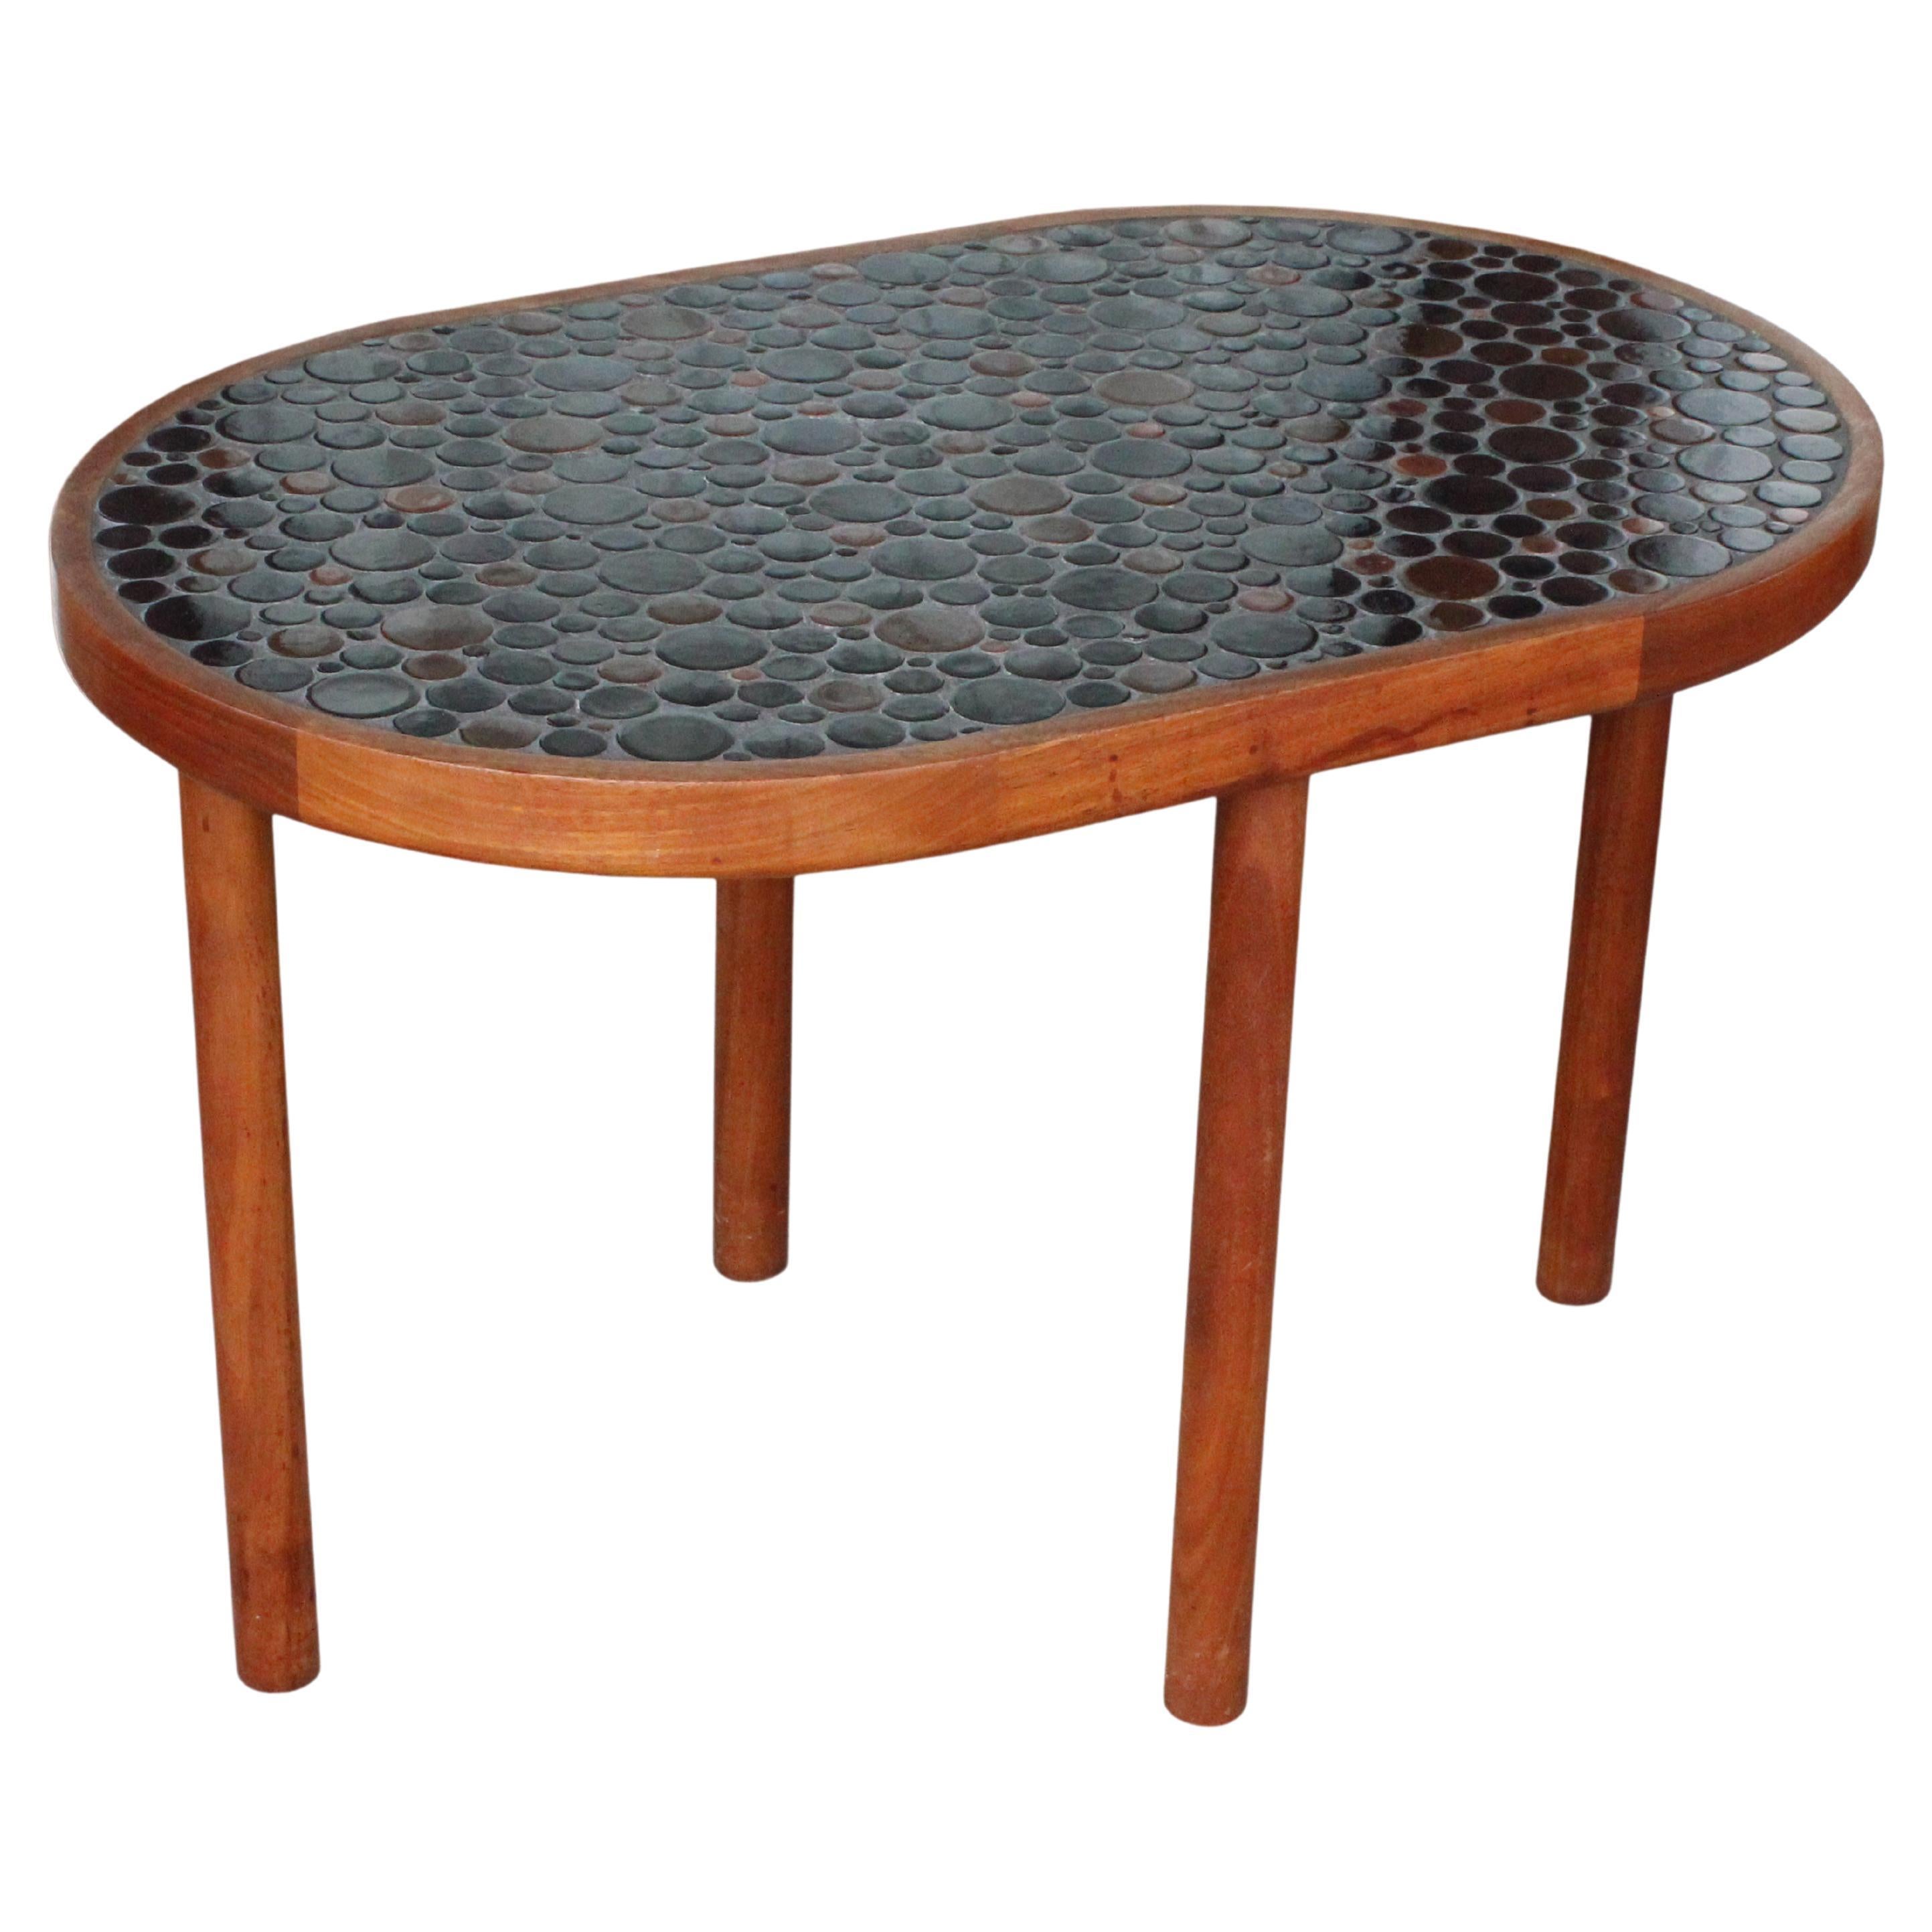 Martz Marshall Studios Mid-Century Modern Walnut and Round Tile Top Table For Sale